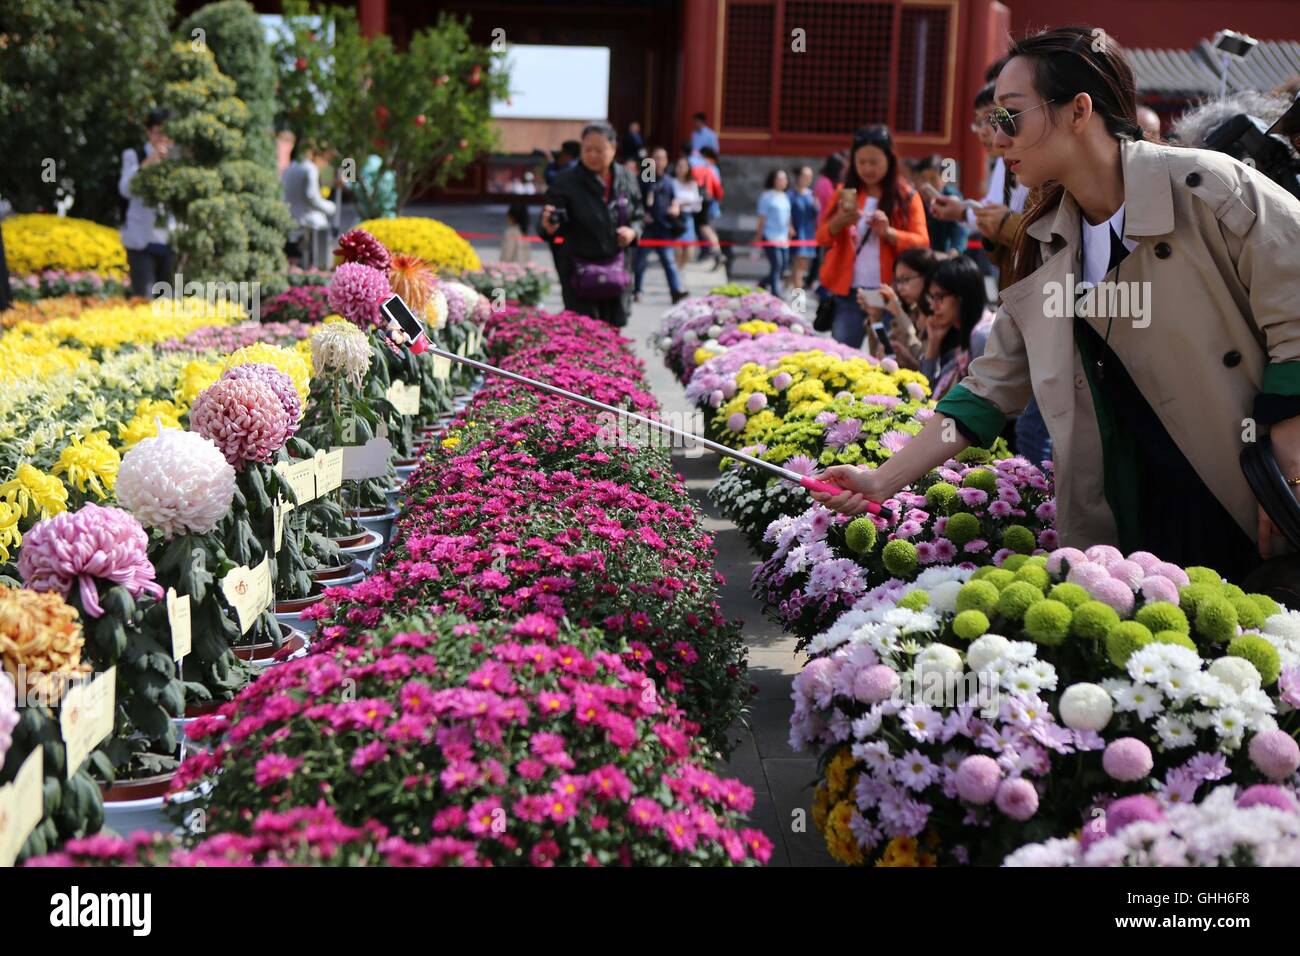 Beijing, Beijing, China. 27th Sep, 2016. Beijing, CHINA-September 27 2016:?(EDITORIAL?USE?ONLY.?CHINA?OUT) More than 30,000 pots of chrysanthemums from Kaifeng City are on display in the Palace Museum on September 27th, 2016, marking the upcoming National Day which falls on October 1st, 2016. The fine chrysanthemums of different kinds are showcased in the Forbidden City from September 27th to October 16th, 2016. Chrysanthemum from Kaifeng City, central ChinaÂ¡Â¯s Hunan Province, is regarded as the first-level chrysanthemum in China. © SIPA Asia/ZUMA Wire/Alamy Live News Stock Photo